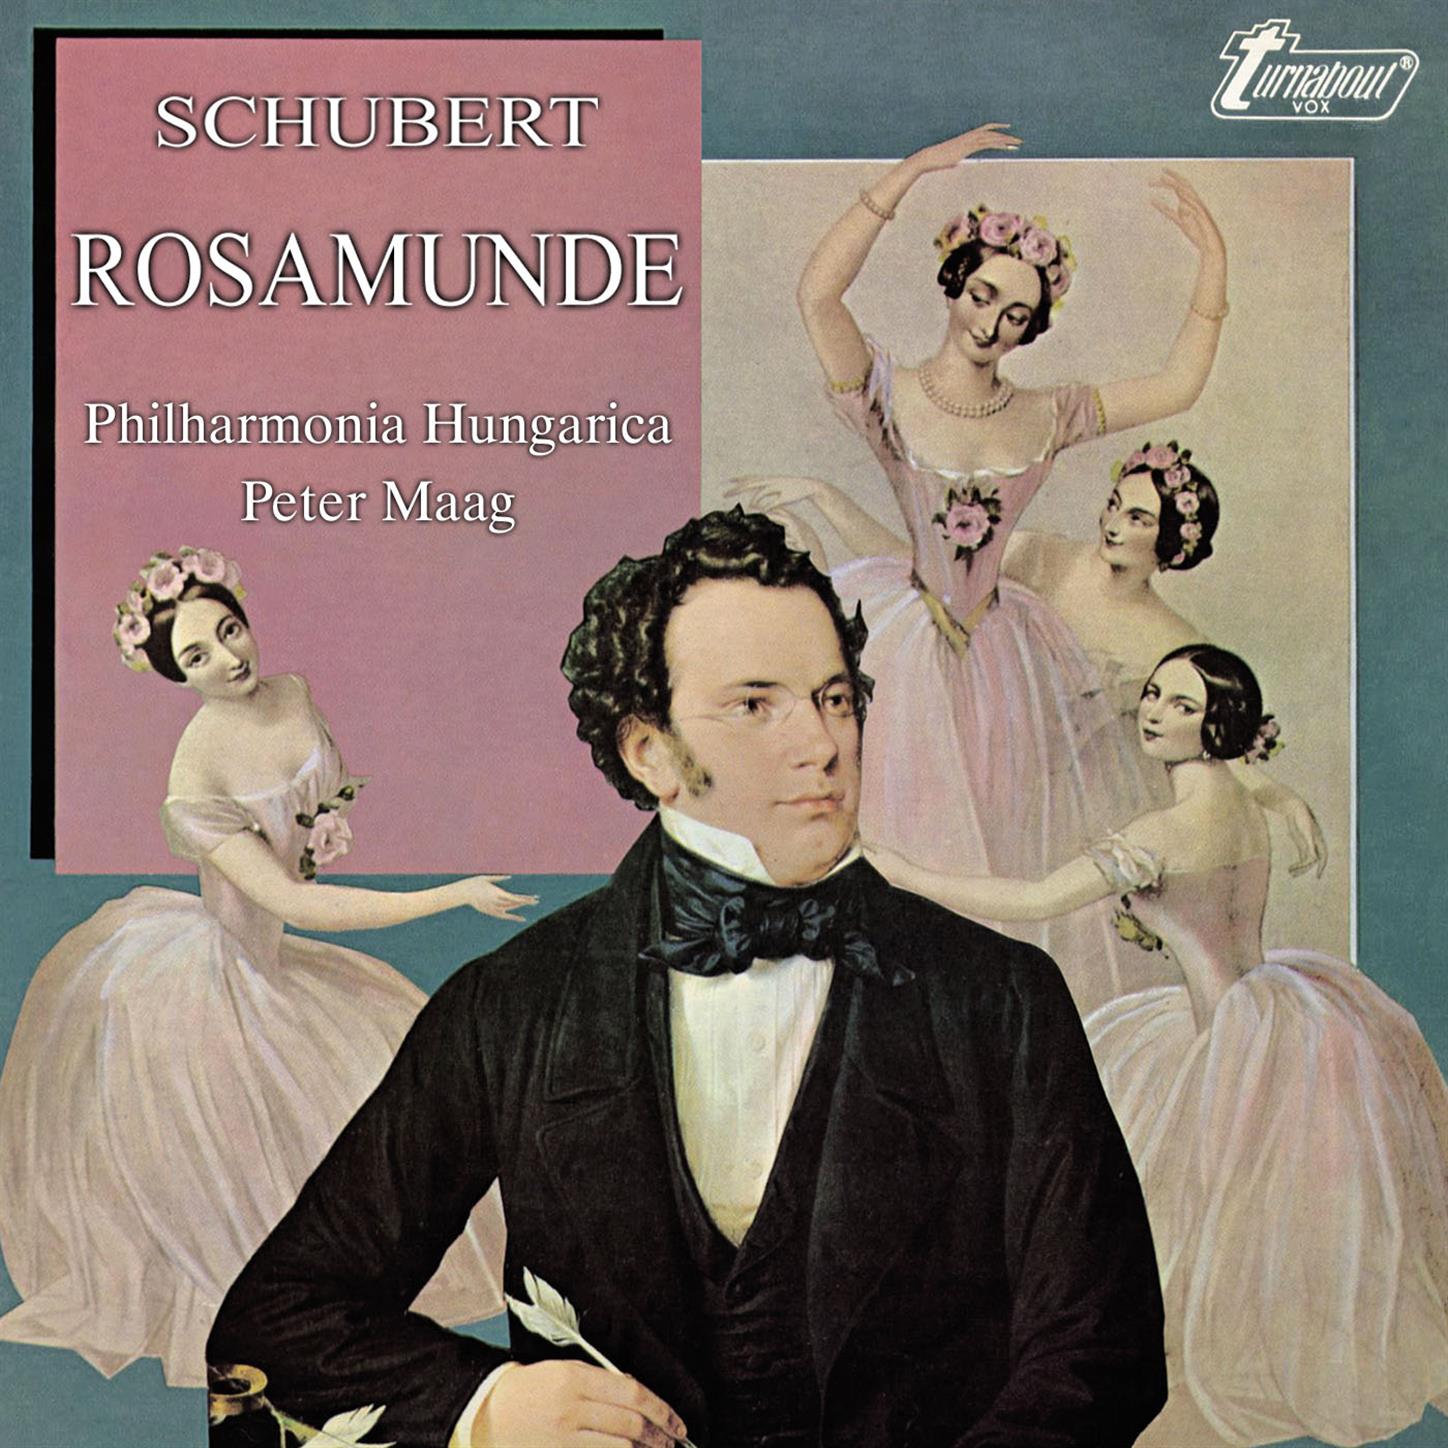 Schubert: Music to Rosamunde (Complete) [Turnabout TV Reissue]